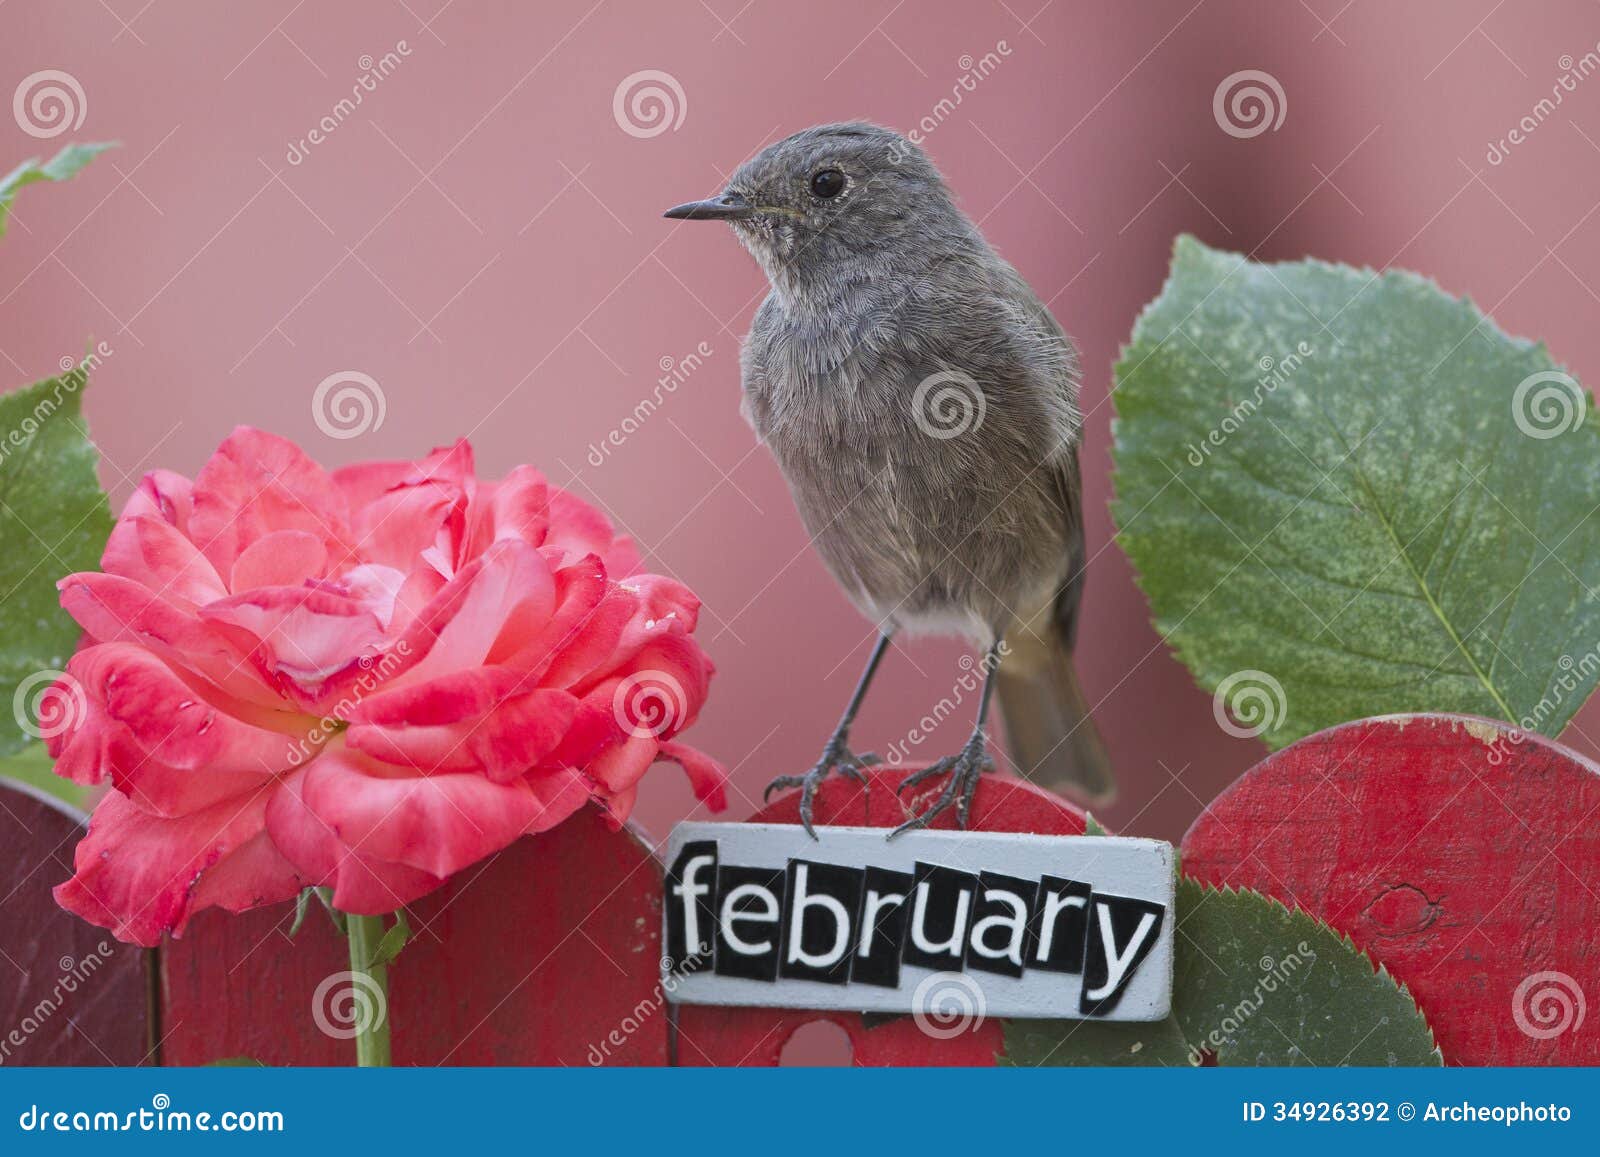 bird perched on a february decorated fence